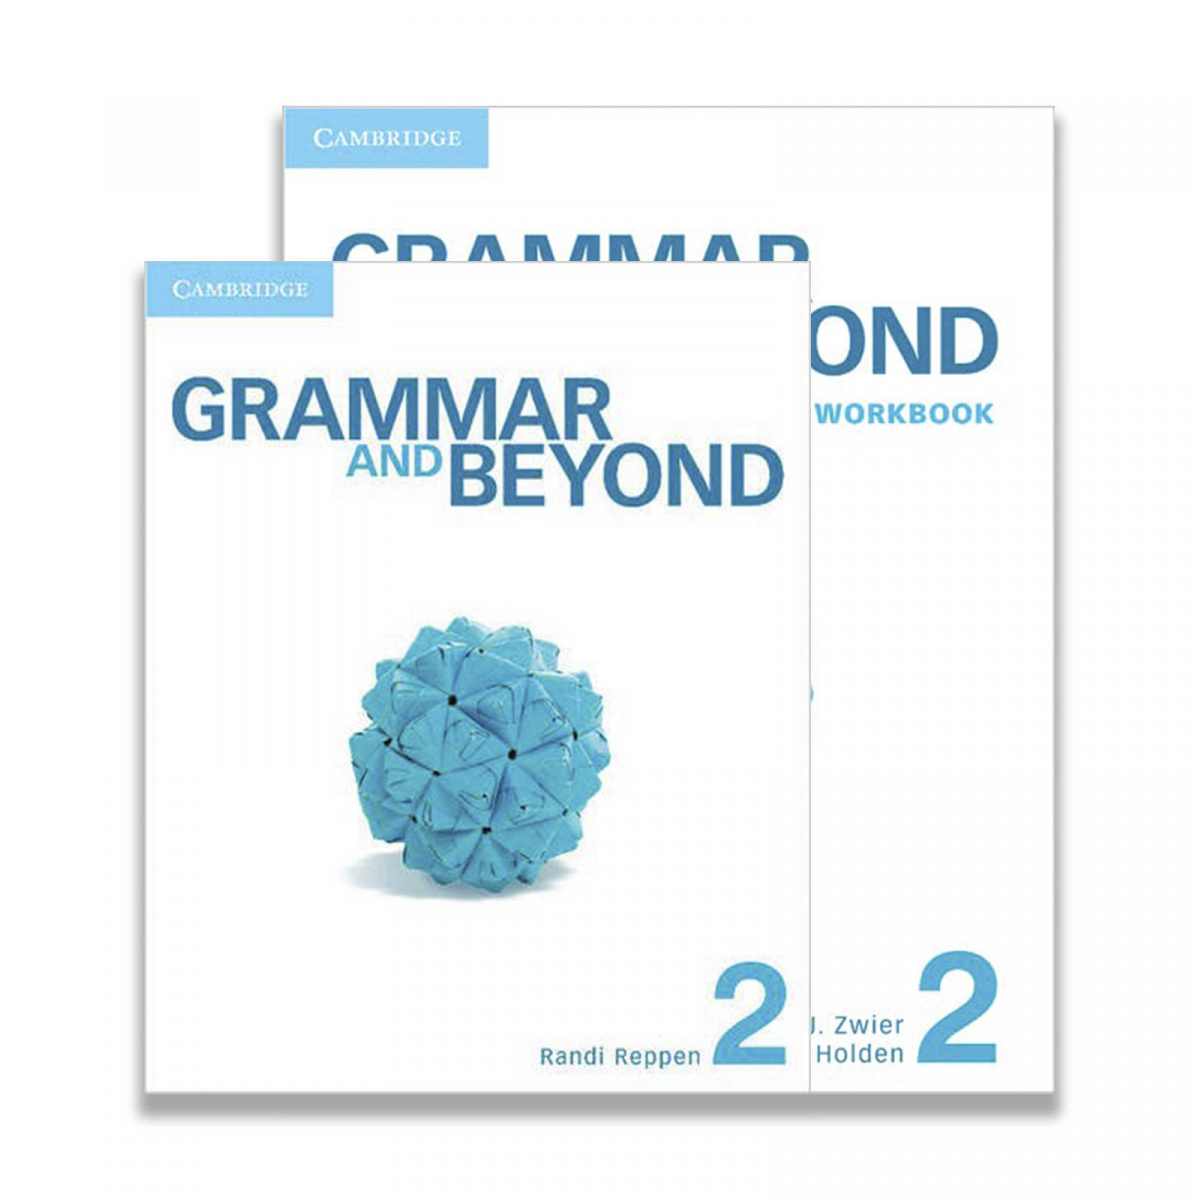 Grammar　Beyond　Student's　Press　Beykoz　Workbook　Skills　Pack　Online　Practice　Book　and　Kitabevi　with　and　Level　University　Cambridge　Writing